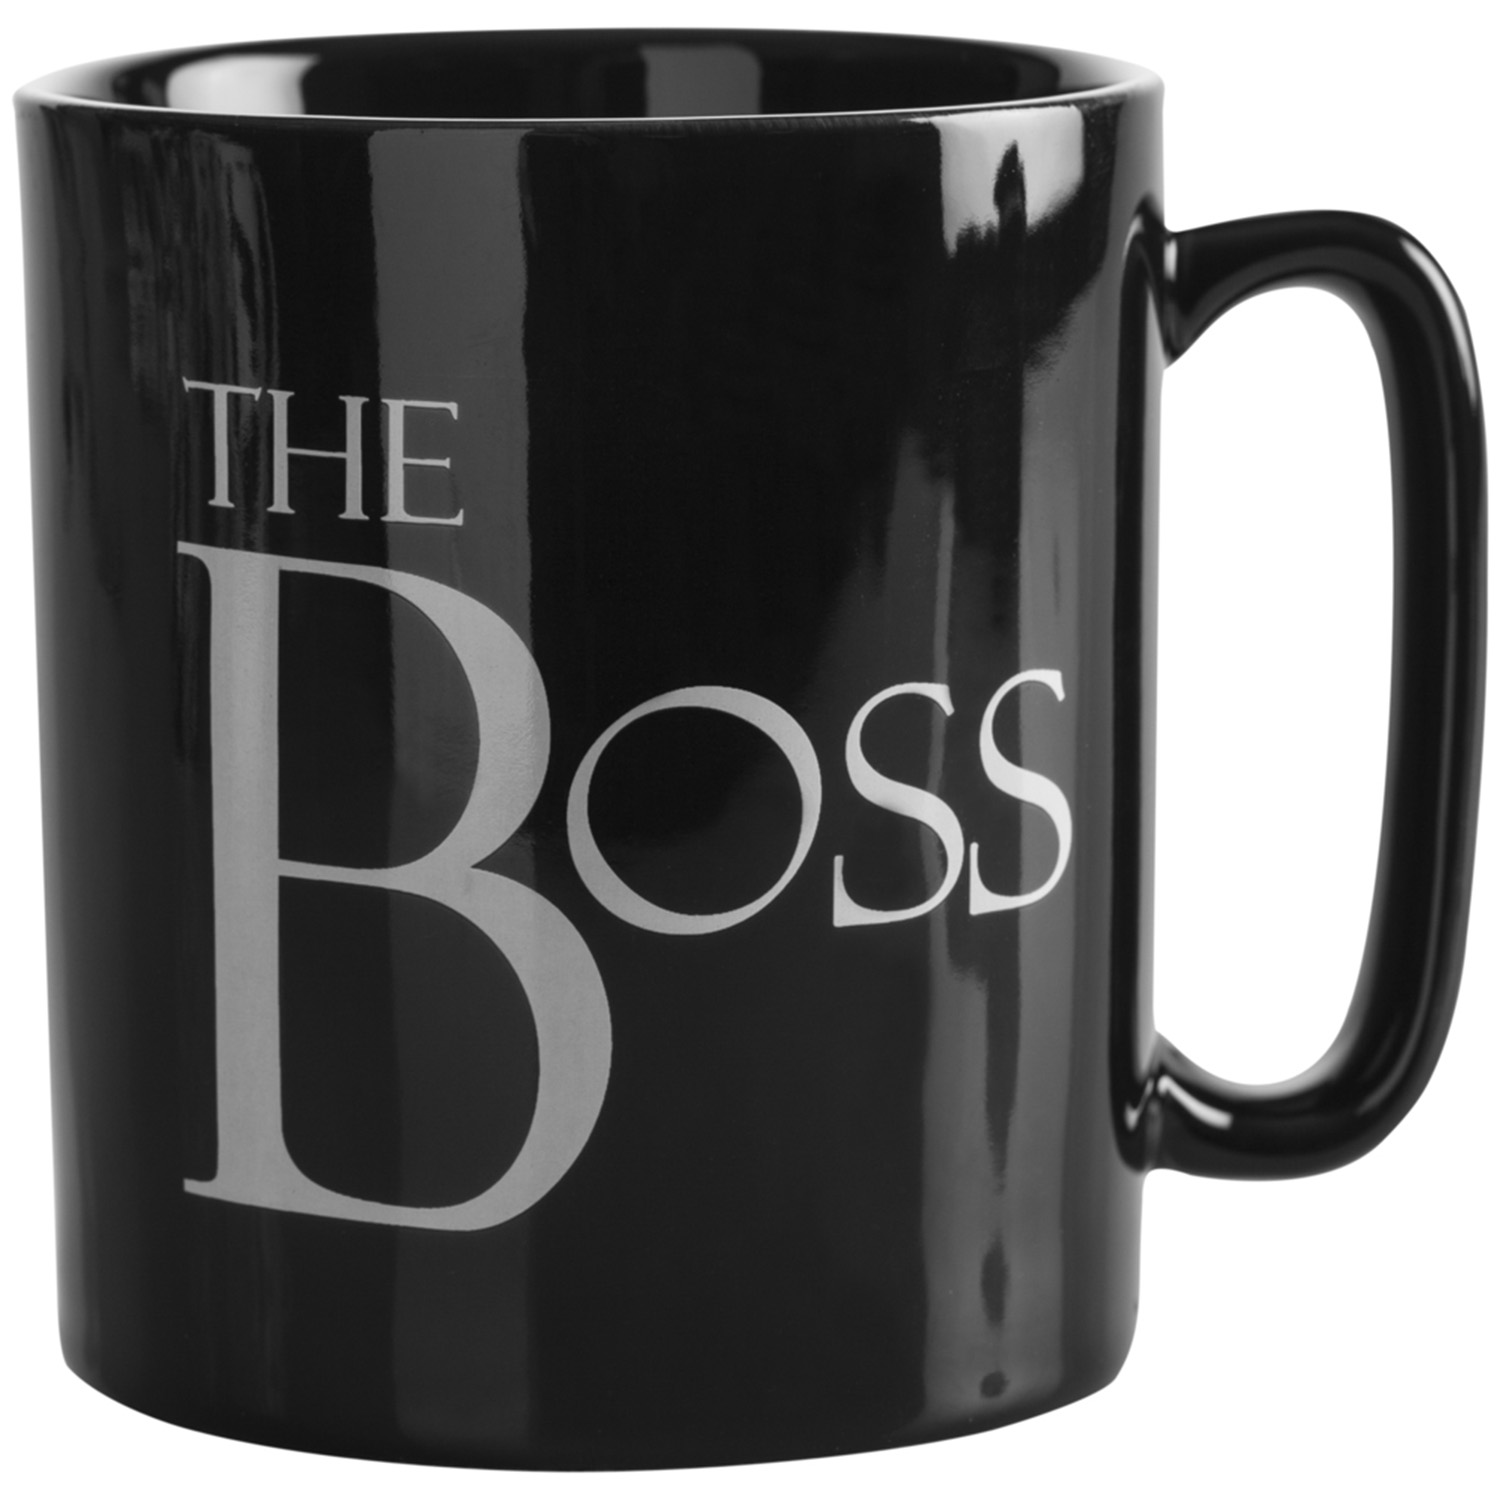 Single The Boss Print Mug in Assorted styles Image